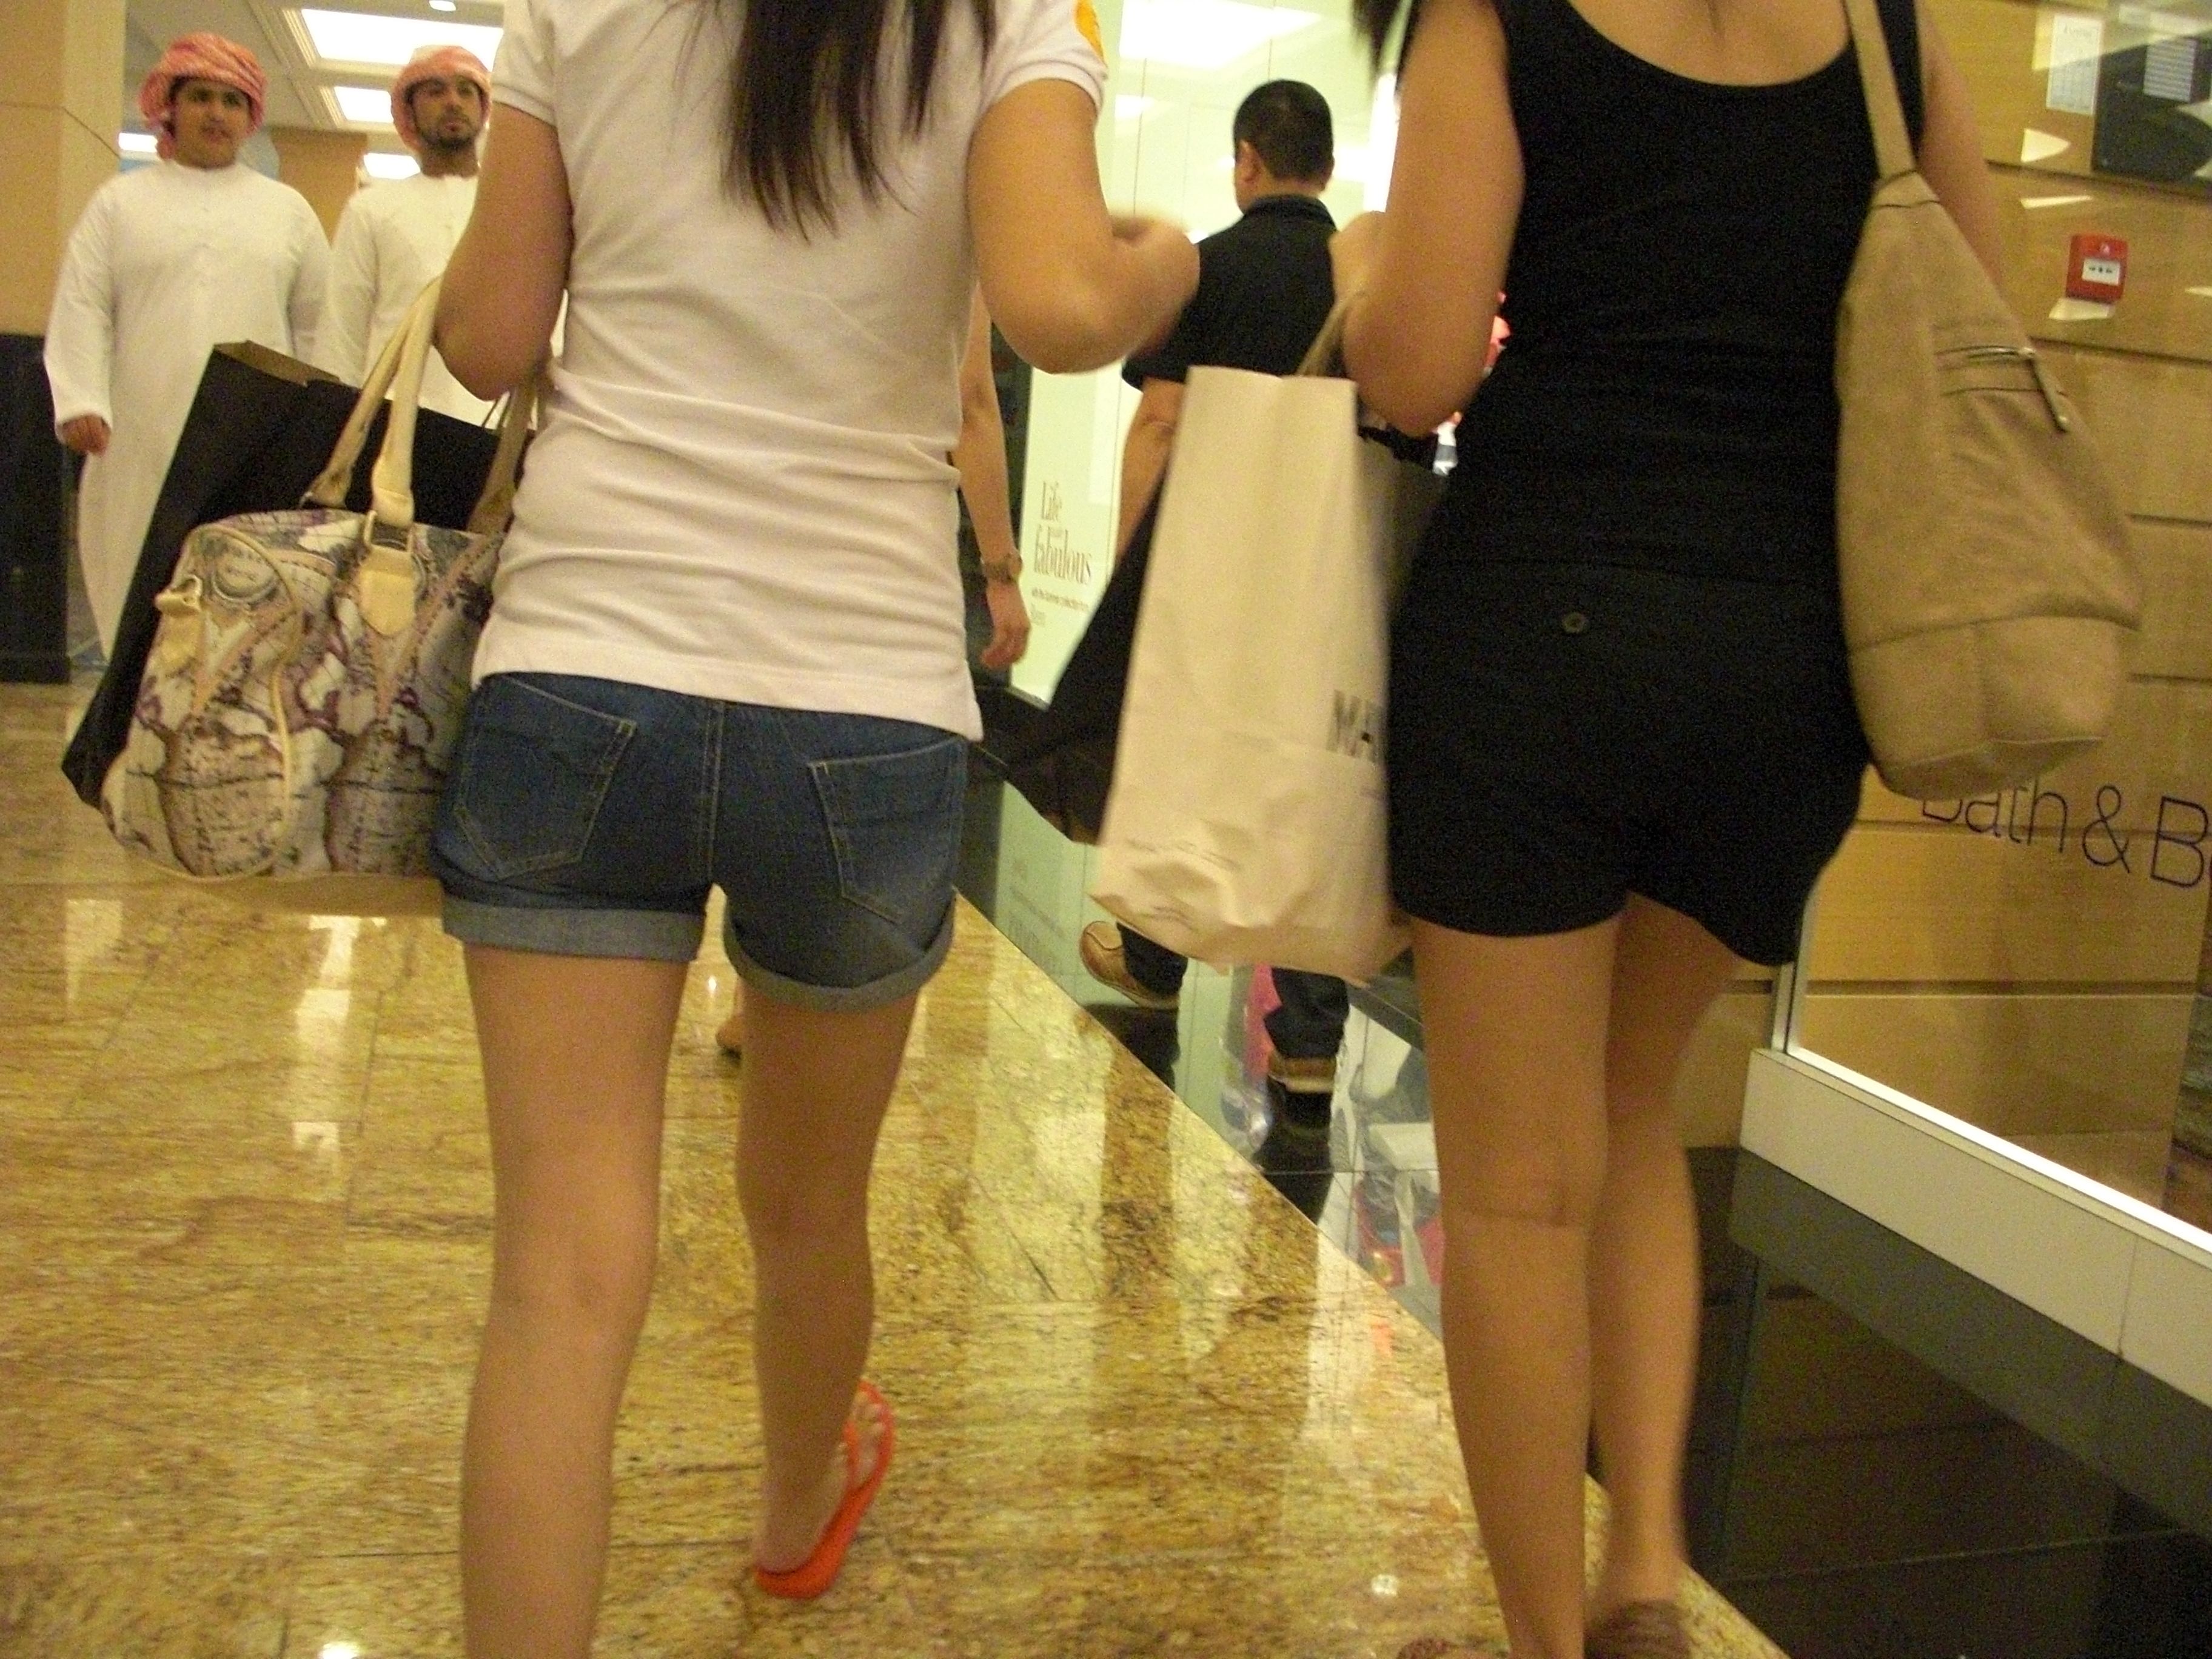 Are these shorts too short? Foreigners told to cover up in UAE